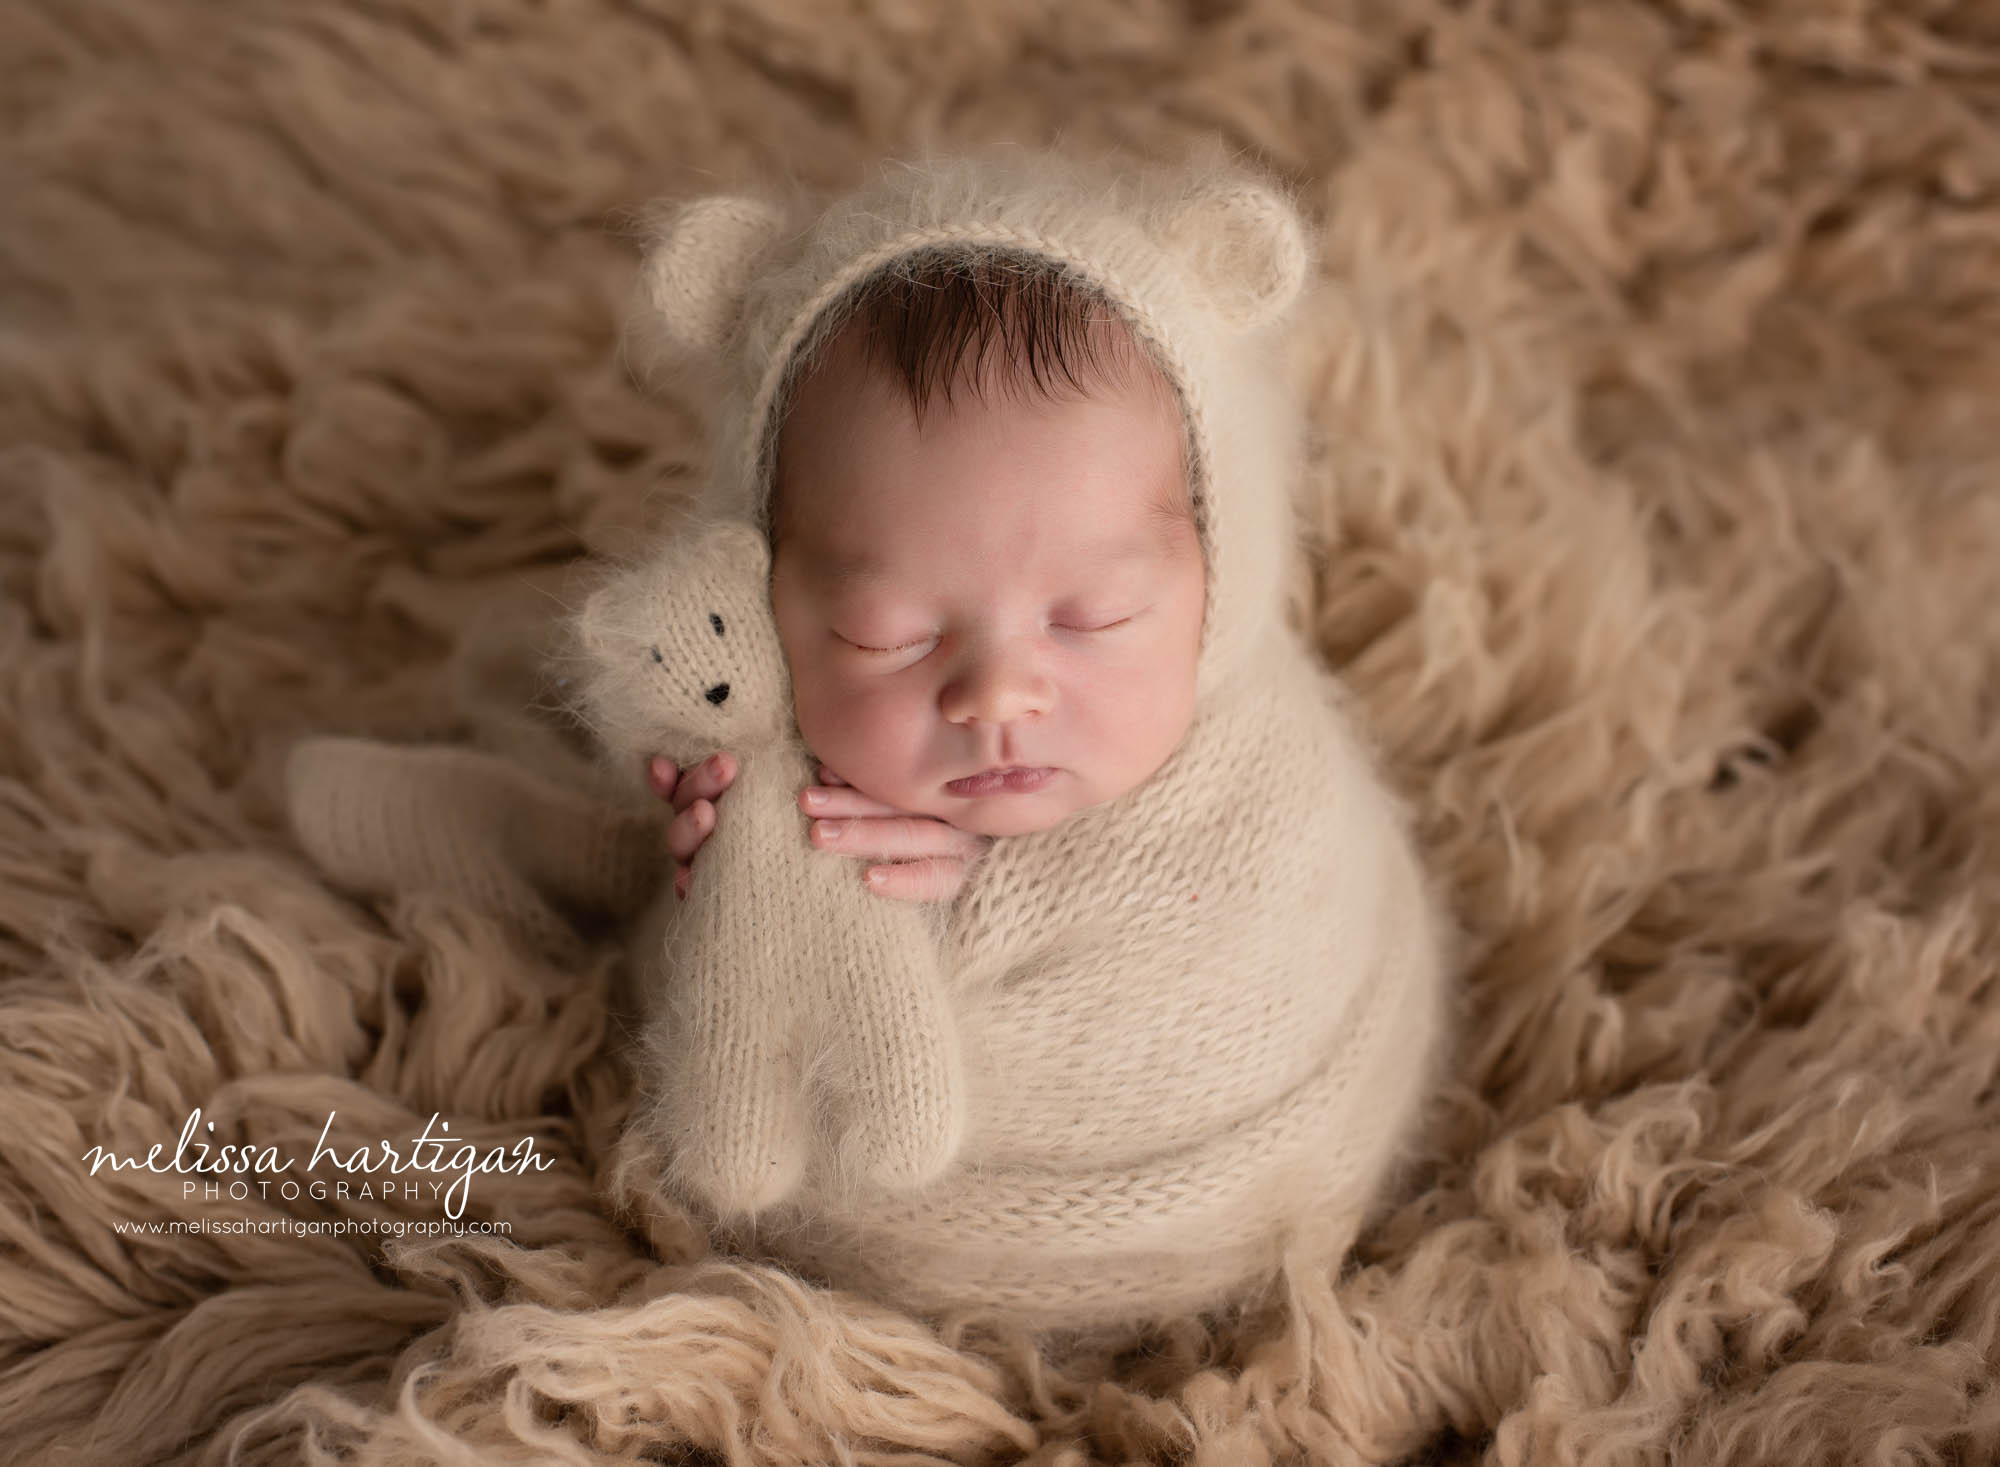 Newborn Baby boy posed in caramel color knitted wrap with matching bear bonnet and teddy bear flokati